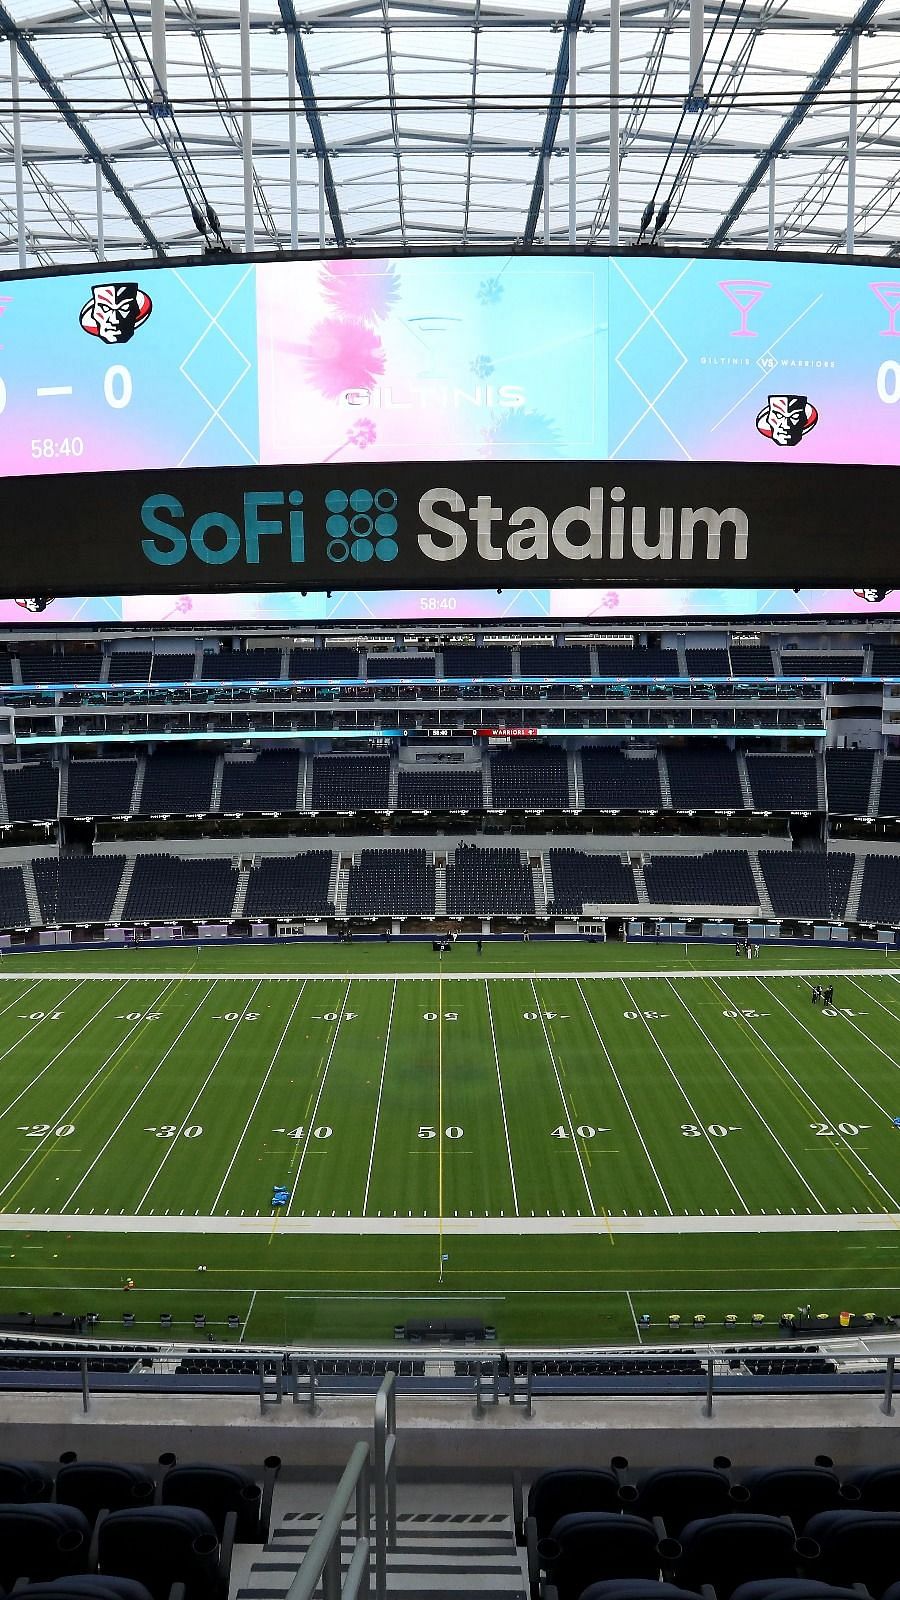 What it's like to be on the field at the new Sofi Stadium